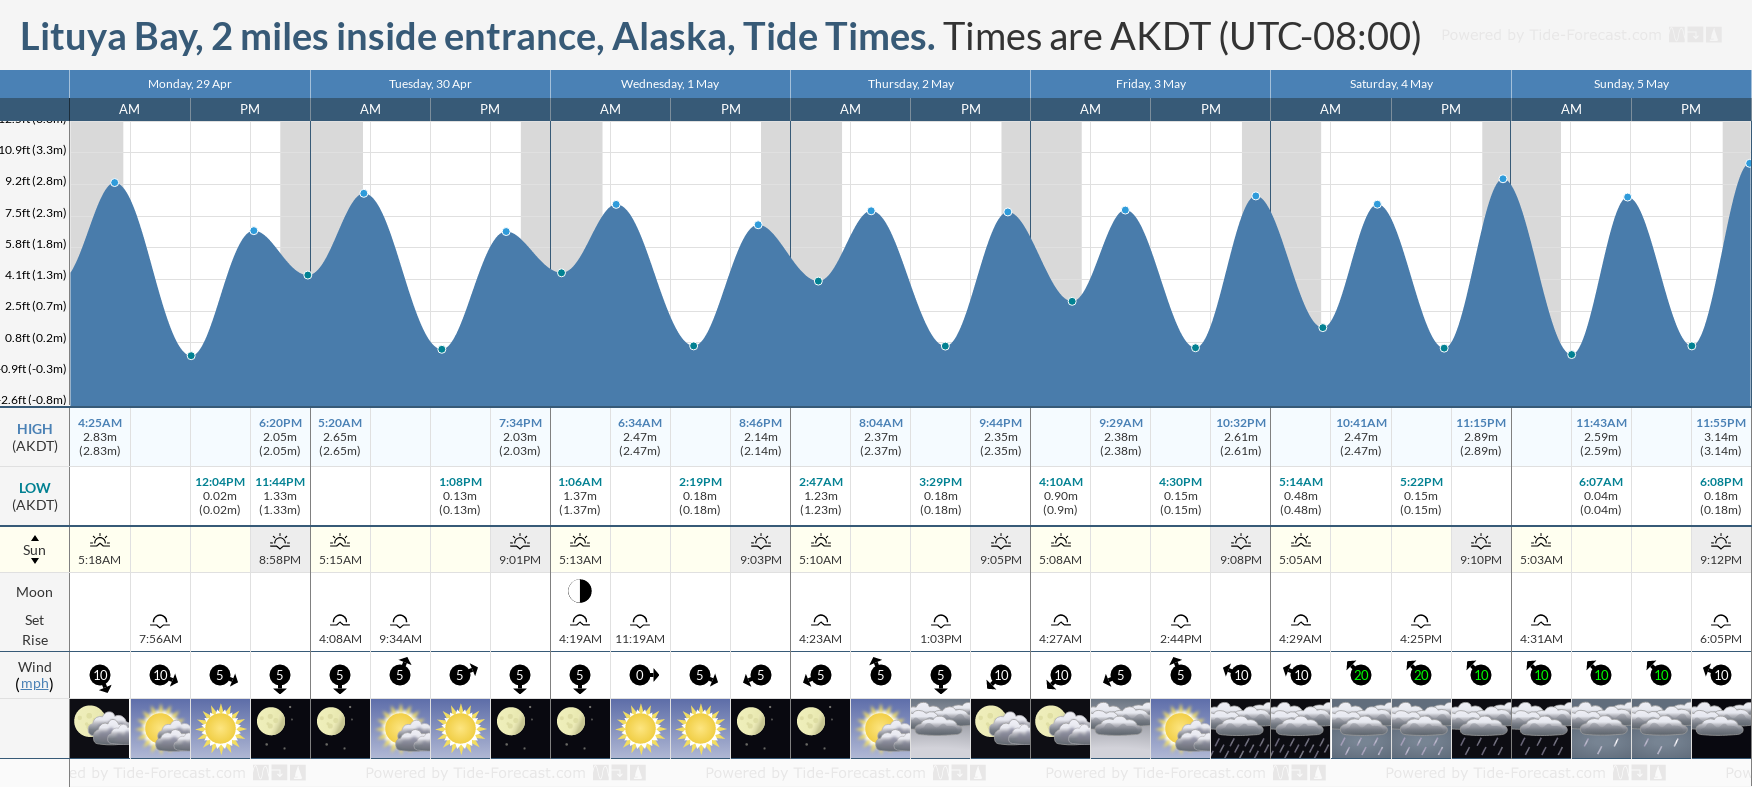 Lituya Bay, 2 miles inside entrance, Alaska Tide Chart including high and low tide times for the next 7 days